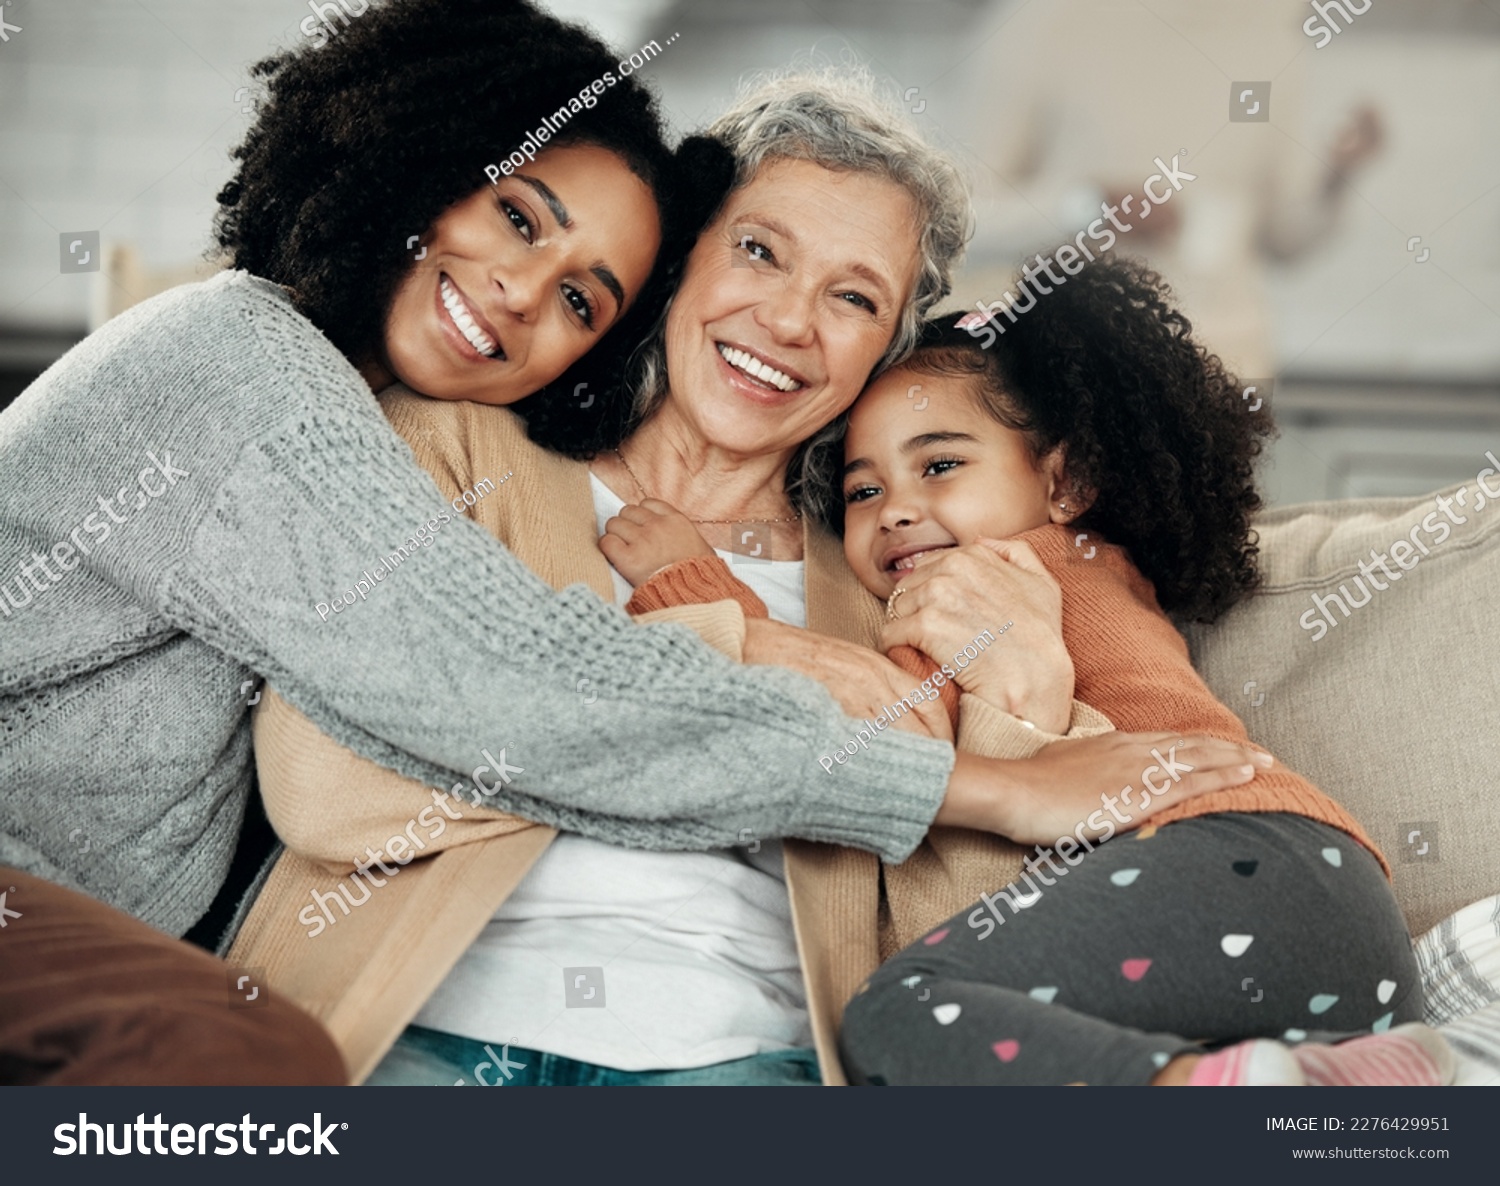 Happy, hug and portrait of family with affection, visit and bonding on mothers day. Smile, interracial and mother, child and grandmother hugging, being affectionate and cheerful for quality time #2276429951